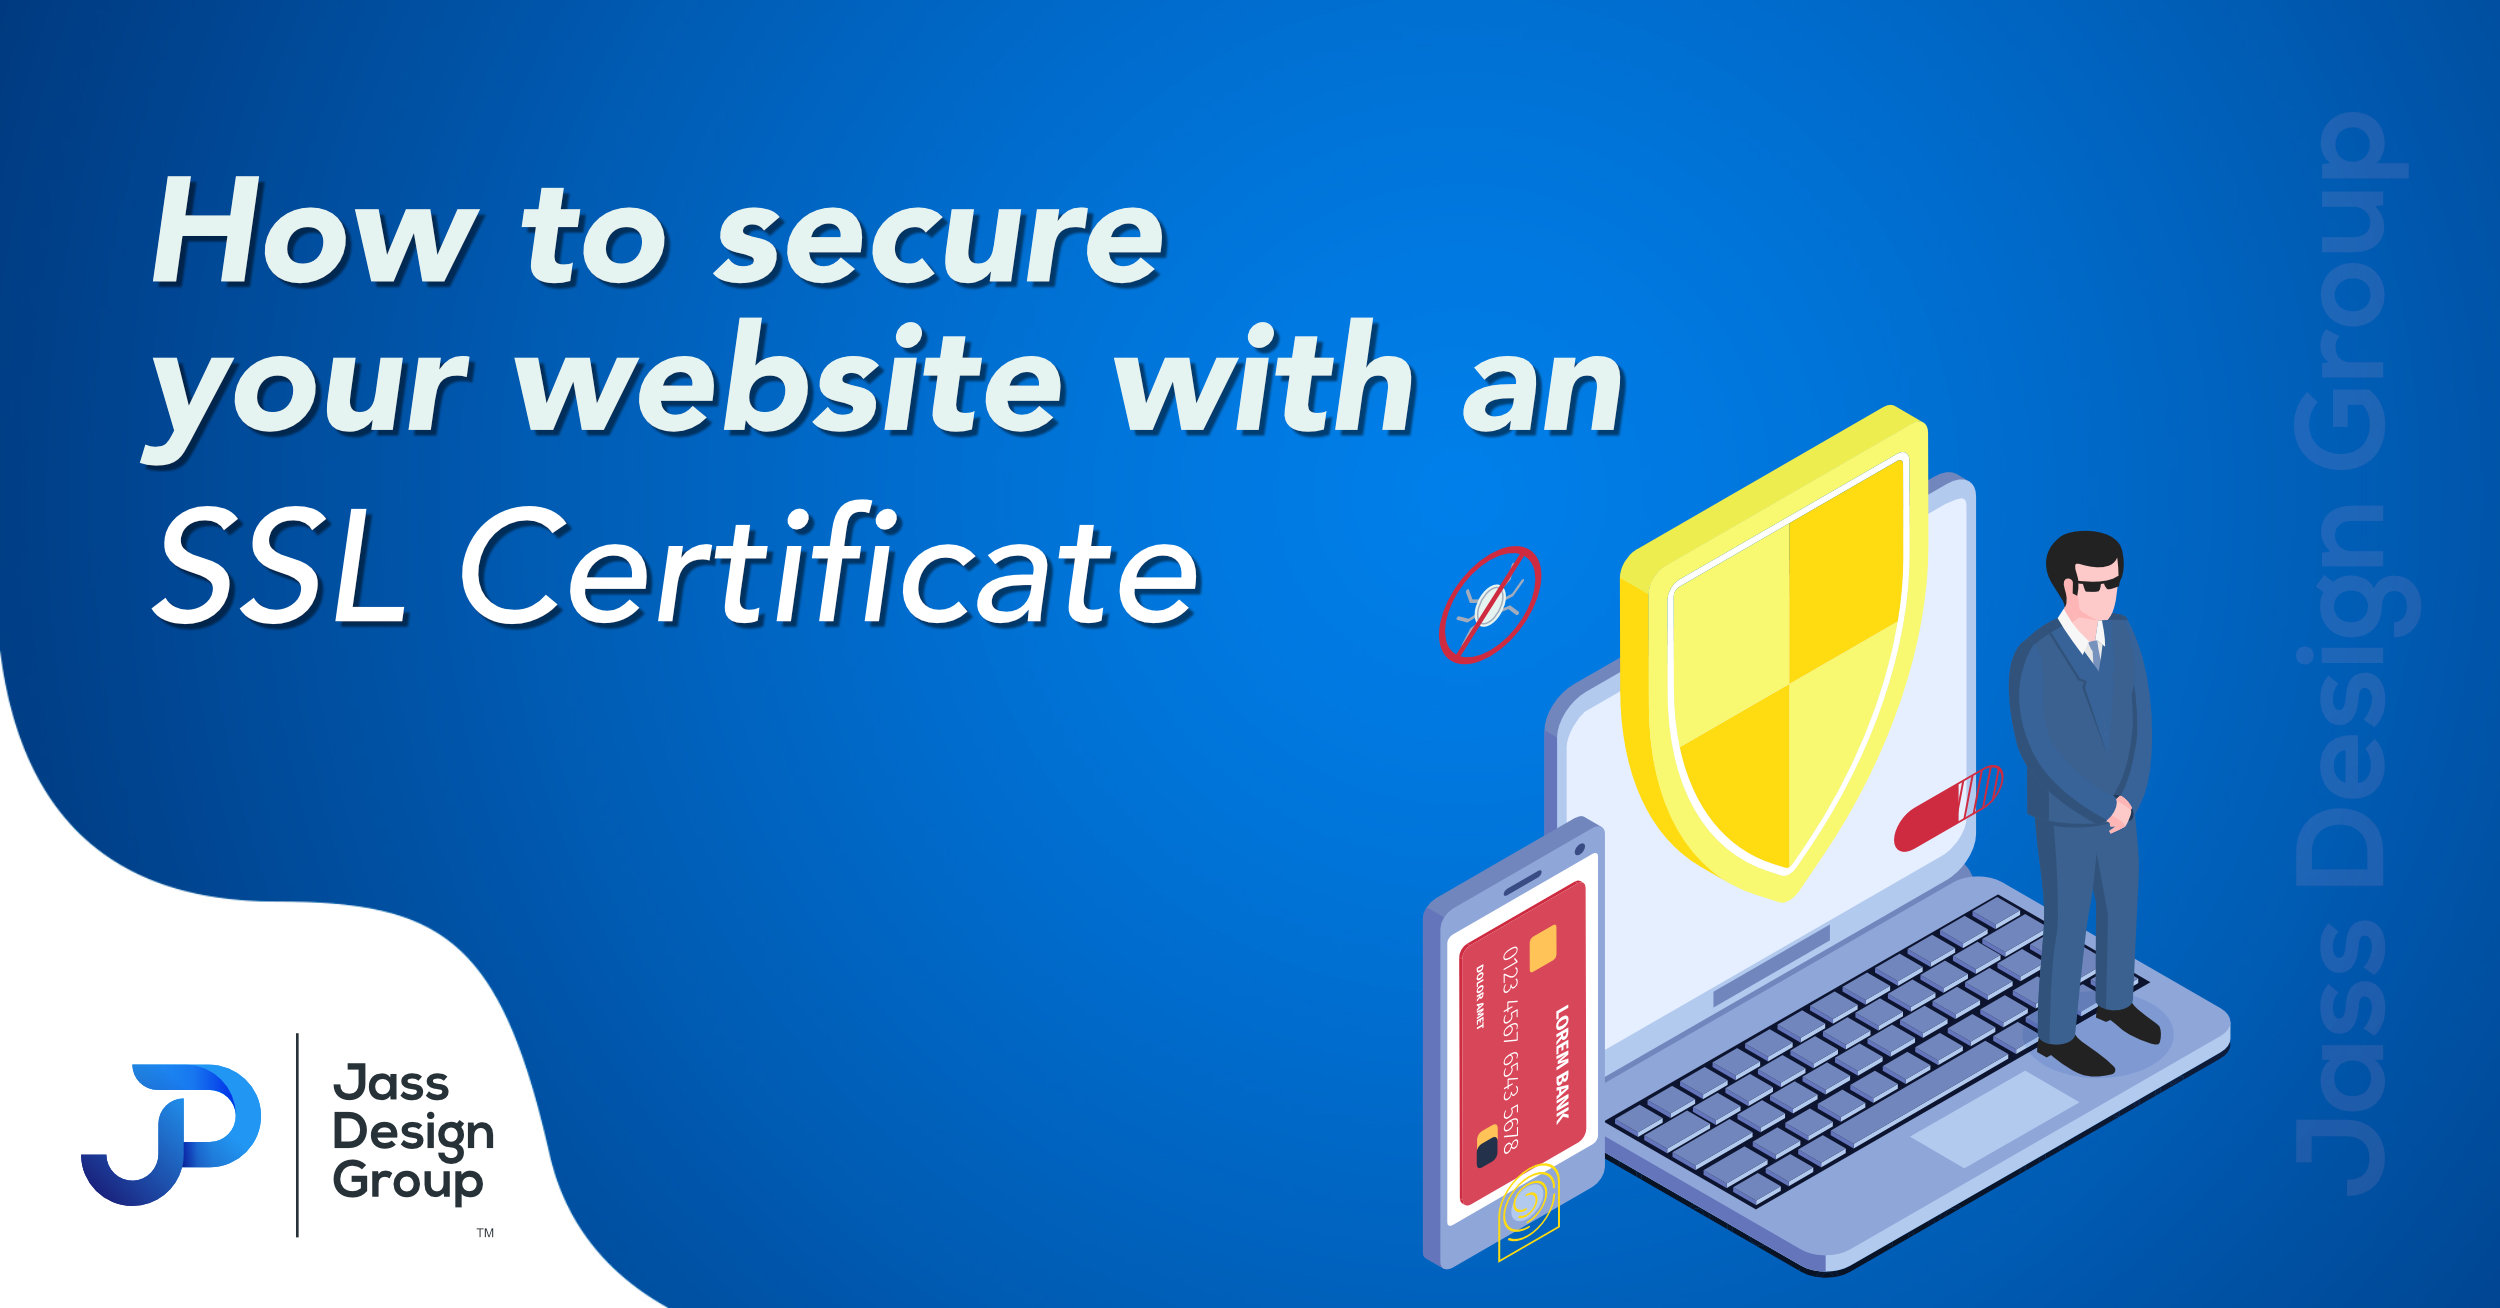 Secure your website with a SSL Certificate